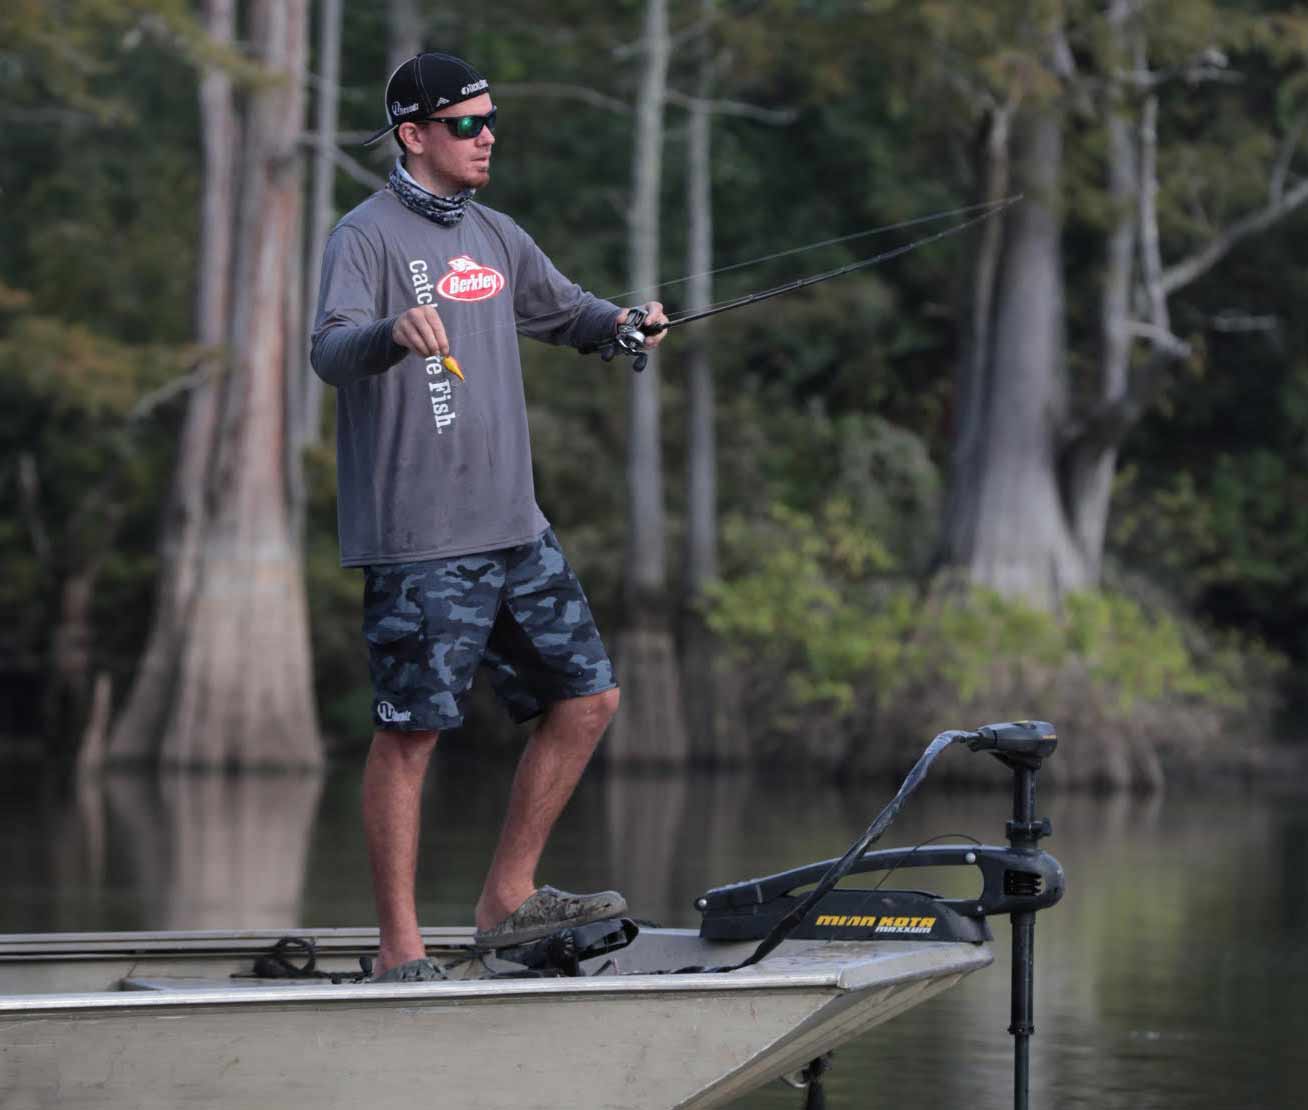 A bass angler stands at the front of a fishing boat getting ready to cast a line.